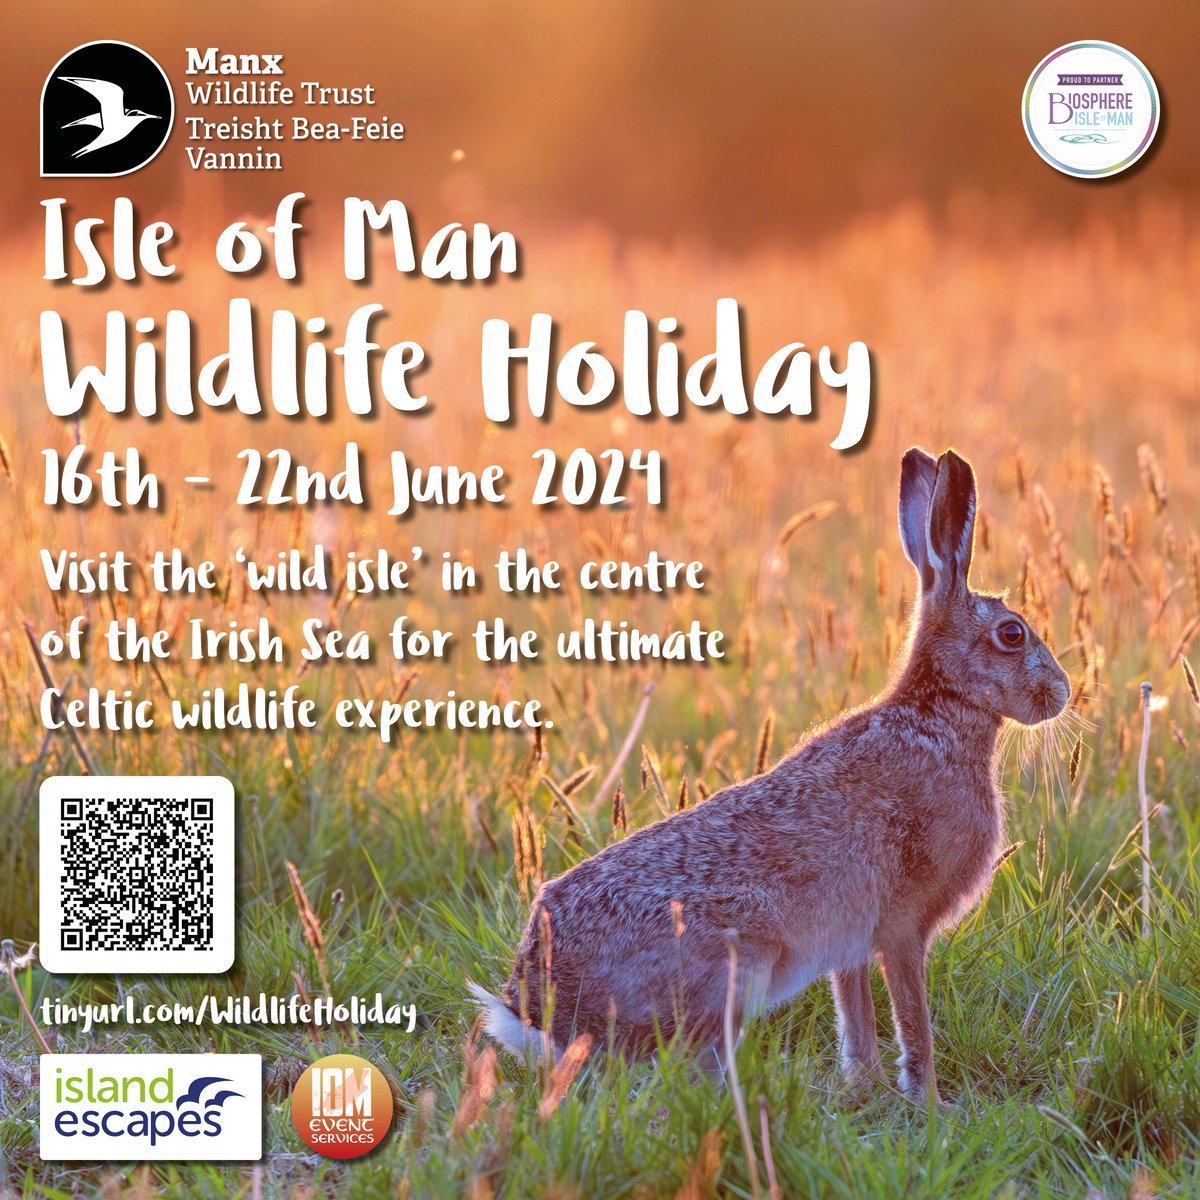 Looking for your next holiday? Check out @manxnature's wildlife experience! Find out more 👉 iomevents.com/experiences/ma…